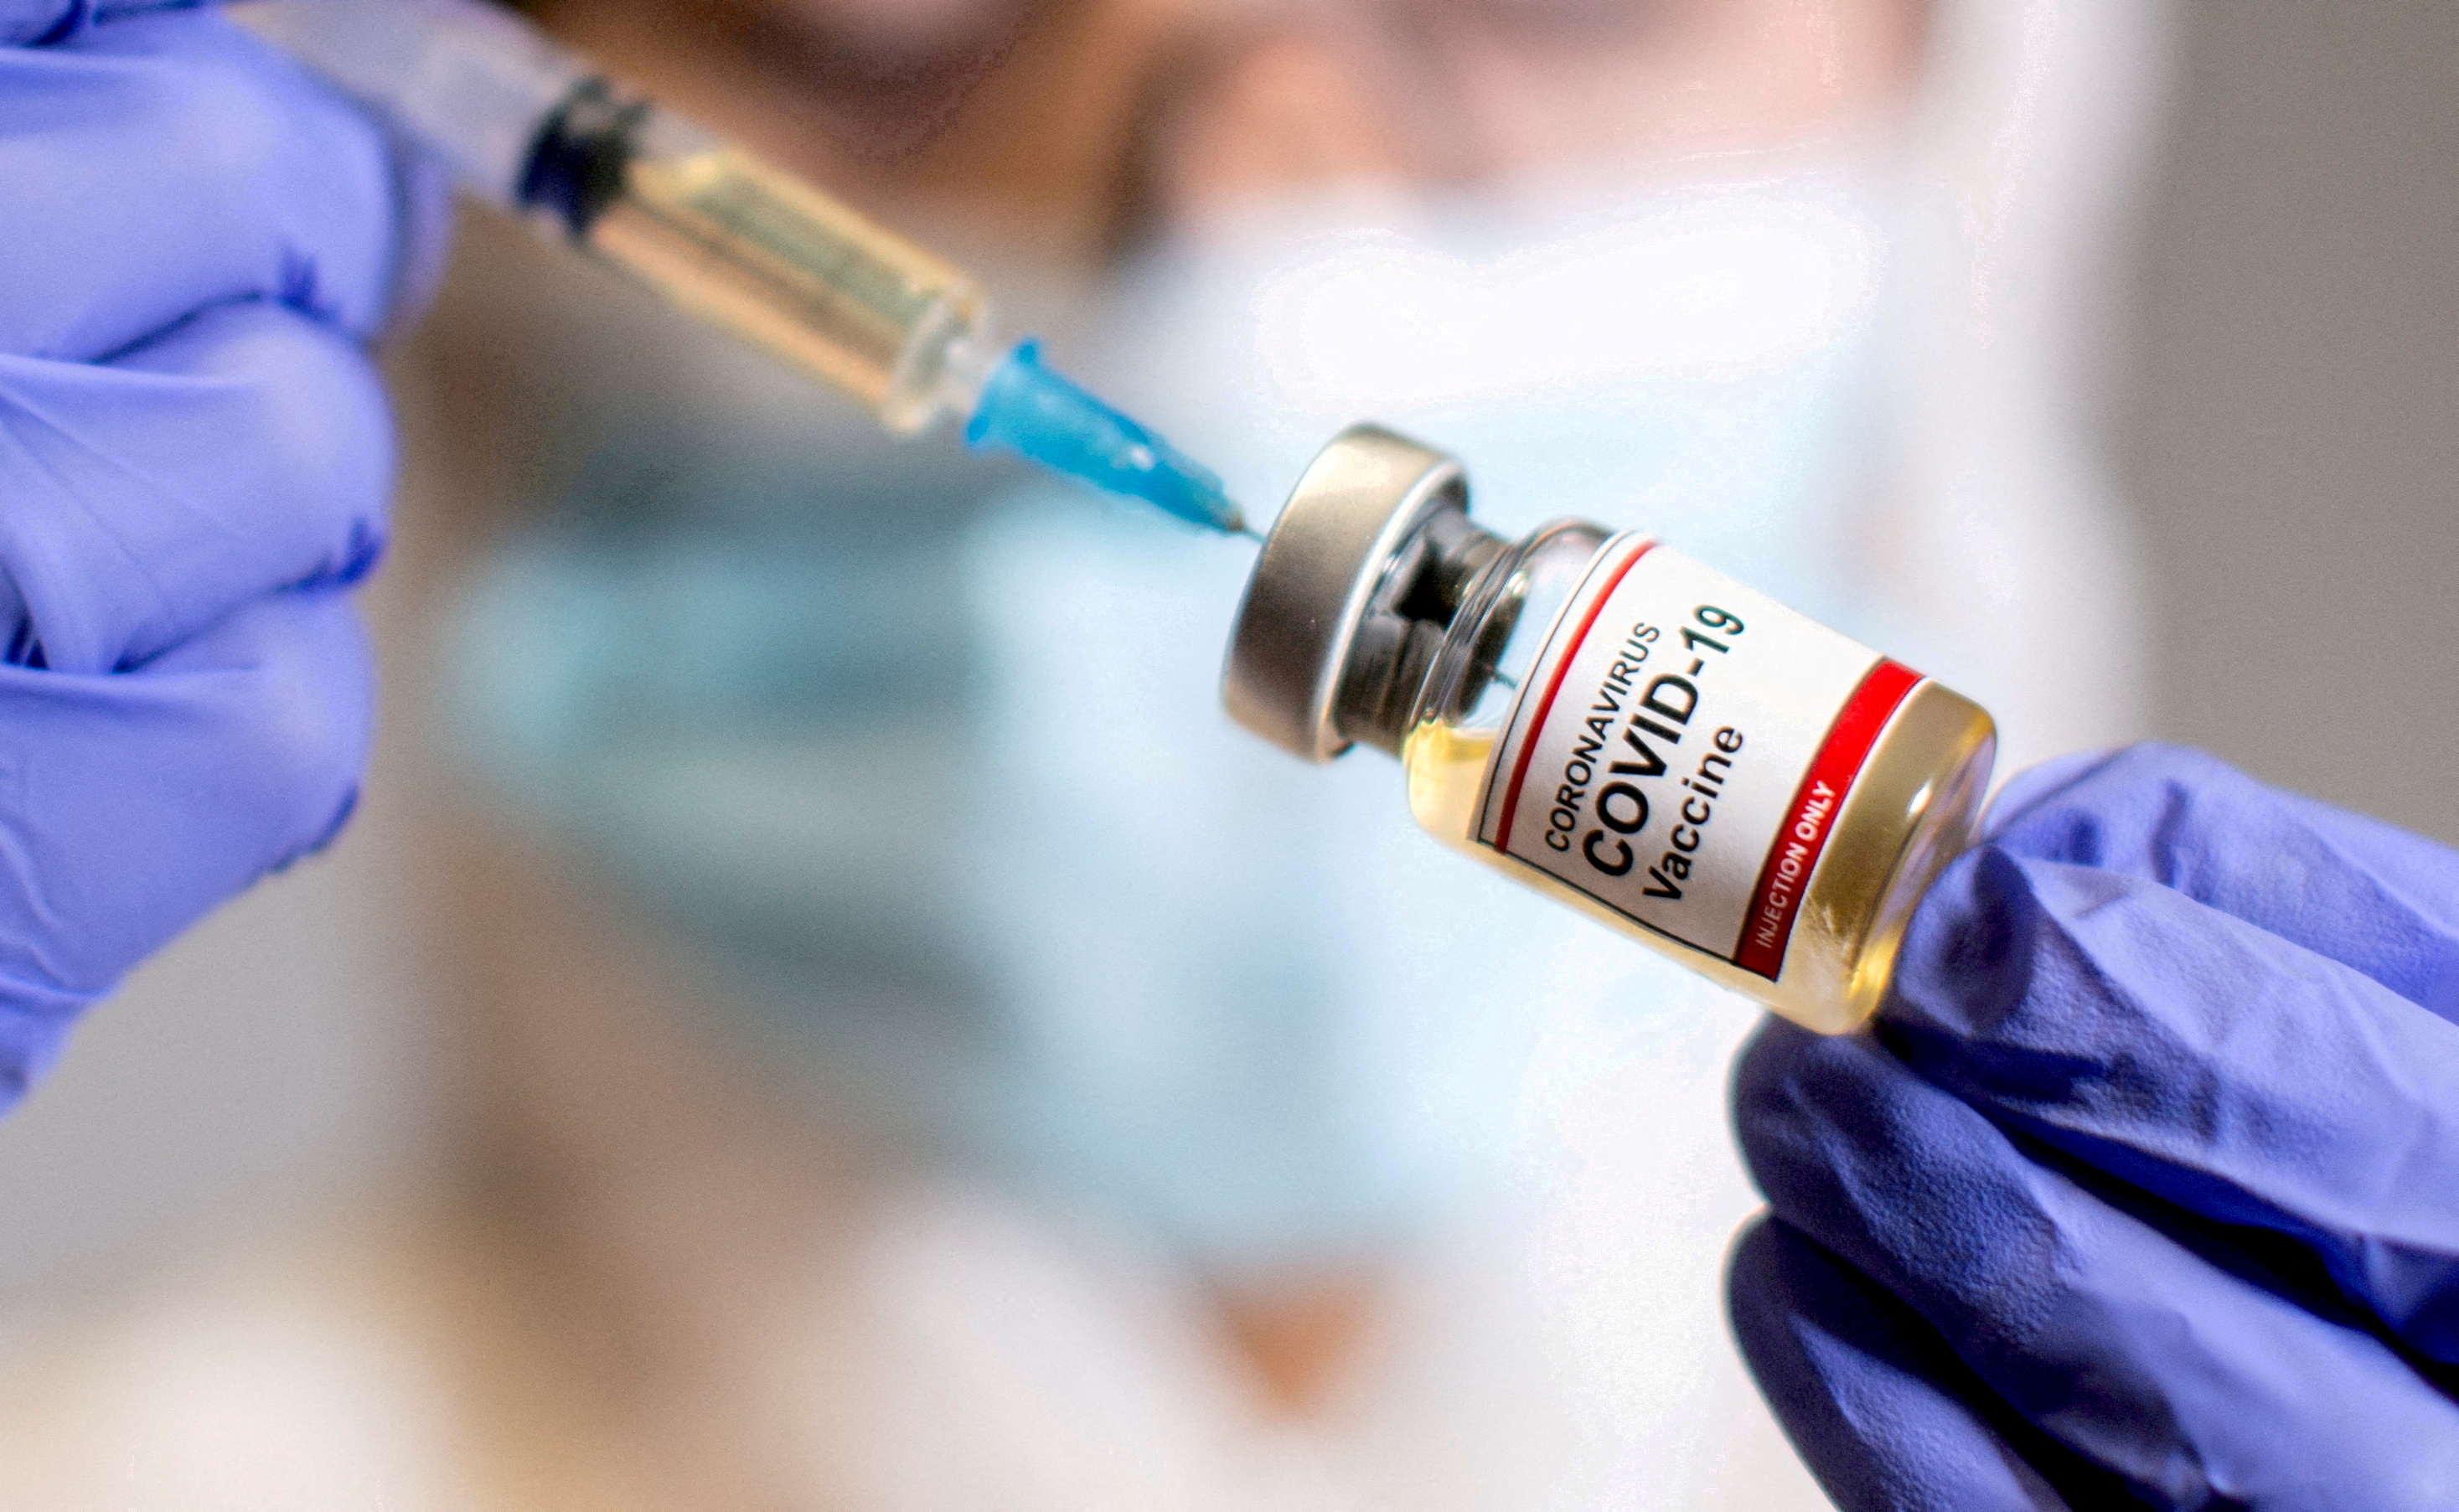 The mRNA technology was a few years old, perfected in 2020 for the development and subsequent success of Moderna and Pfizer-BioNTech's COVID-19 vaccines.  (REUTERS/Dado Ruvic/File Photo)